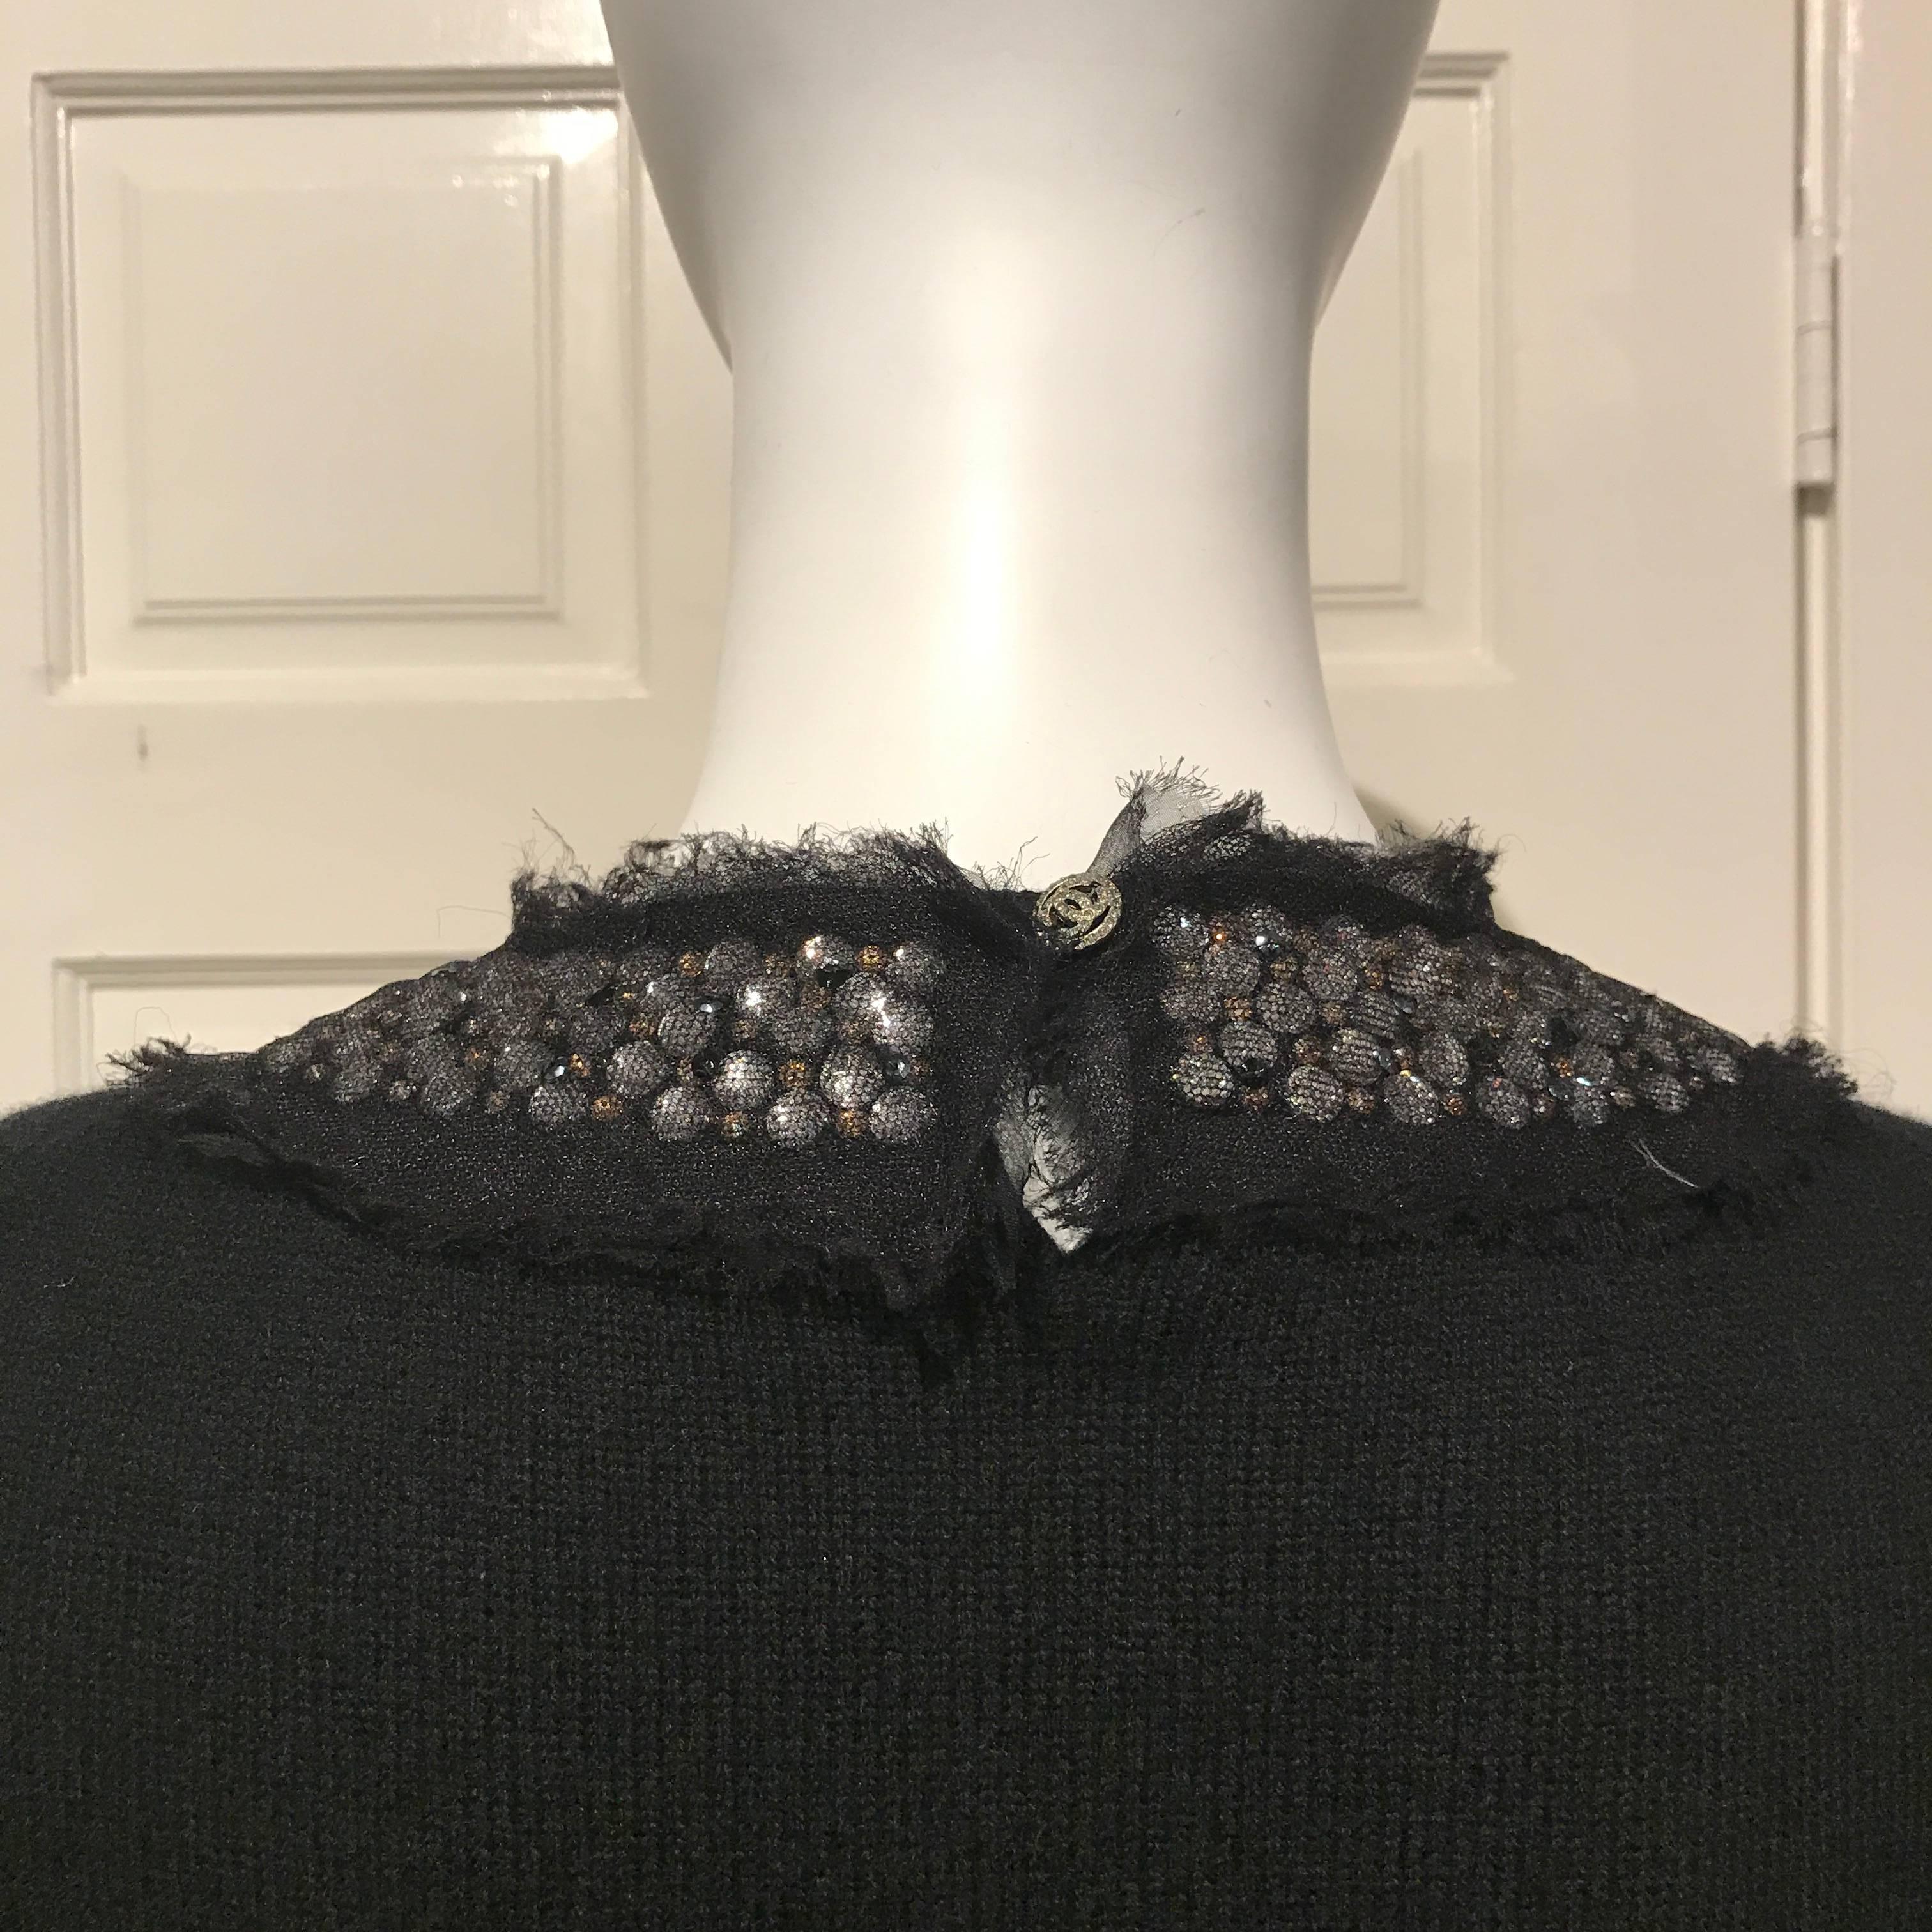 Chanel Black Cashmere Sweater With Jeweled Neckline Sz36 (Us4) In Excellent Condition For Sale In San Francisco, CA